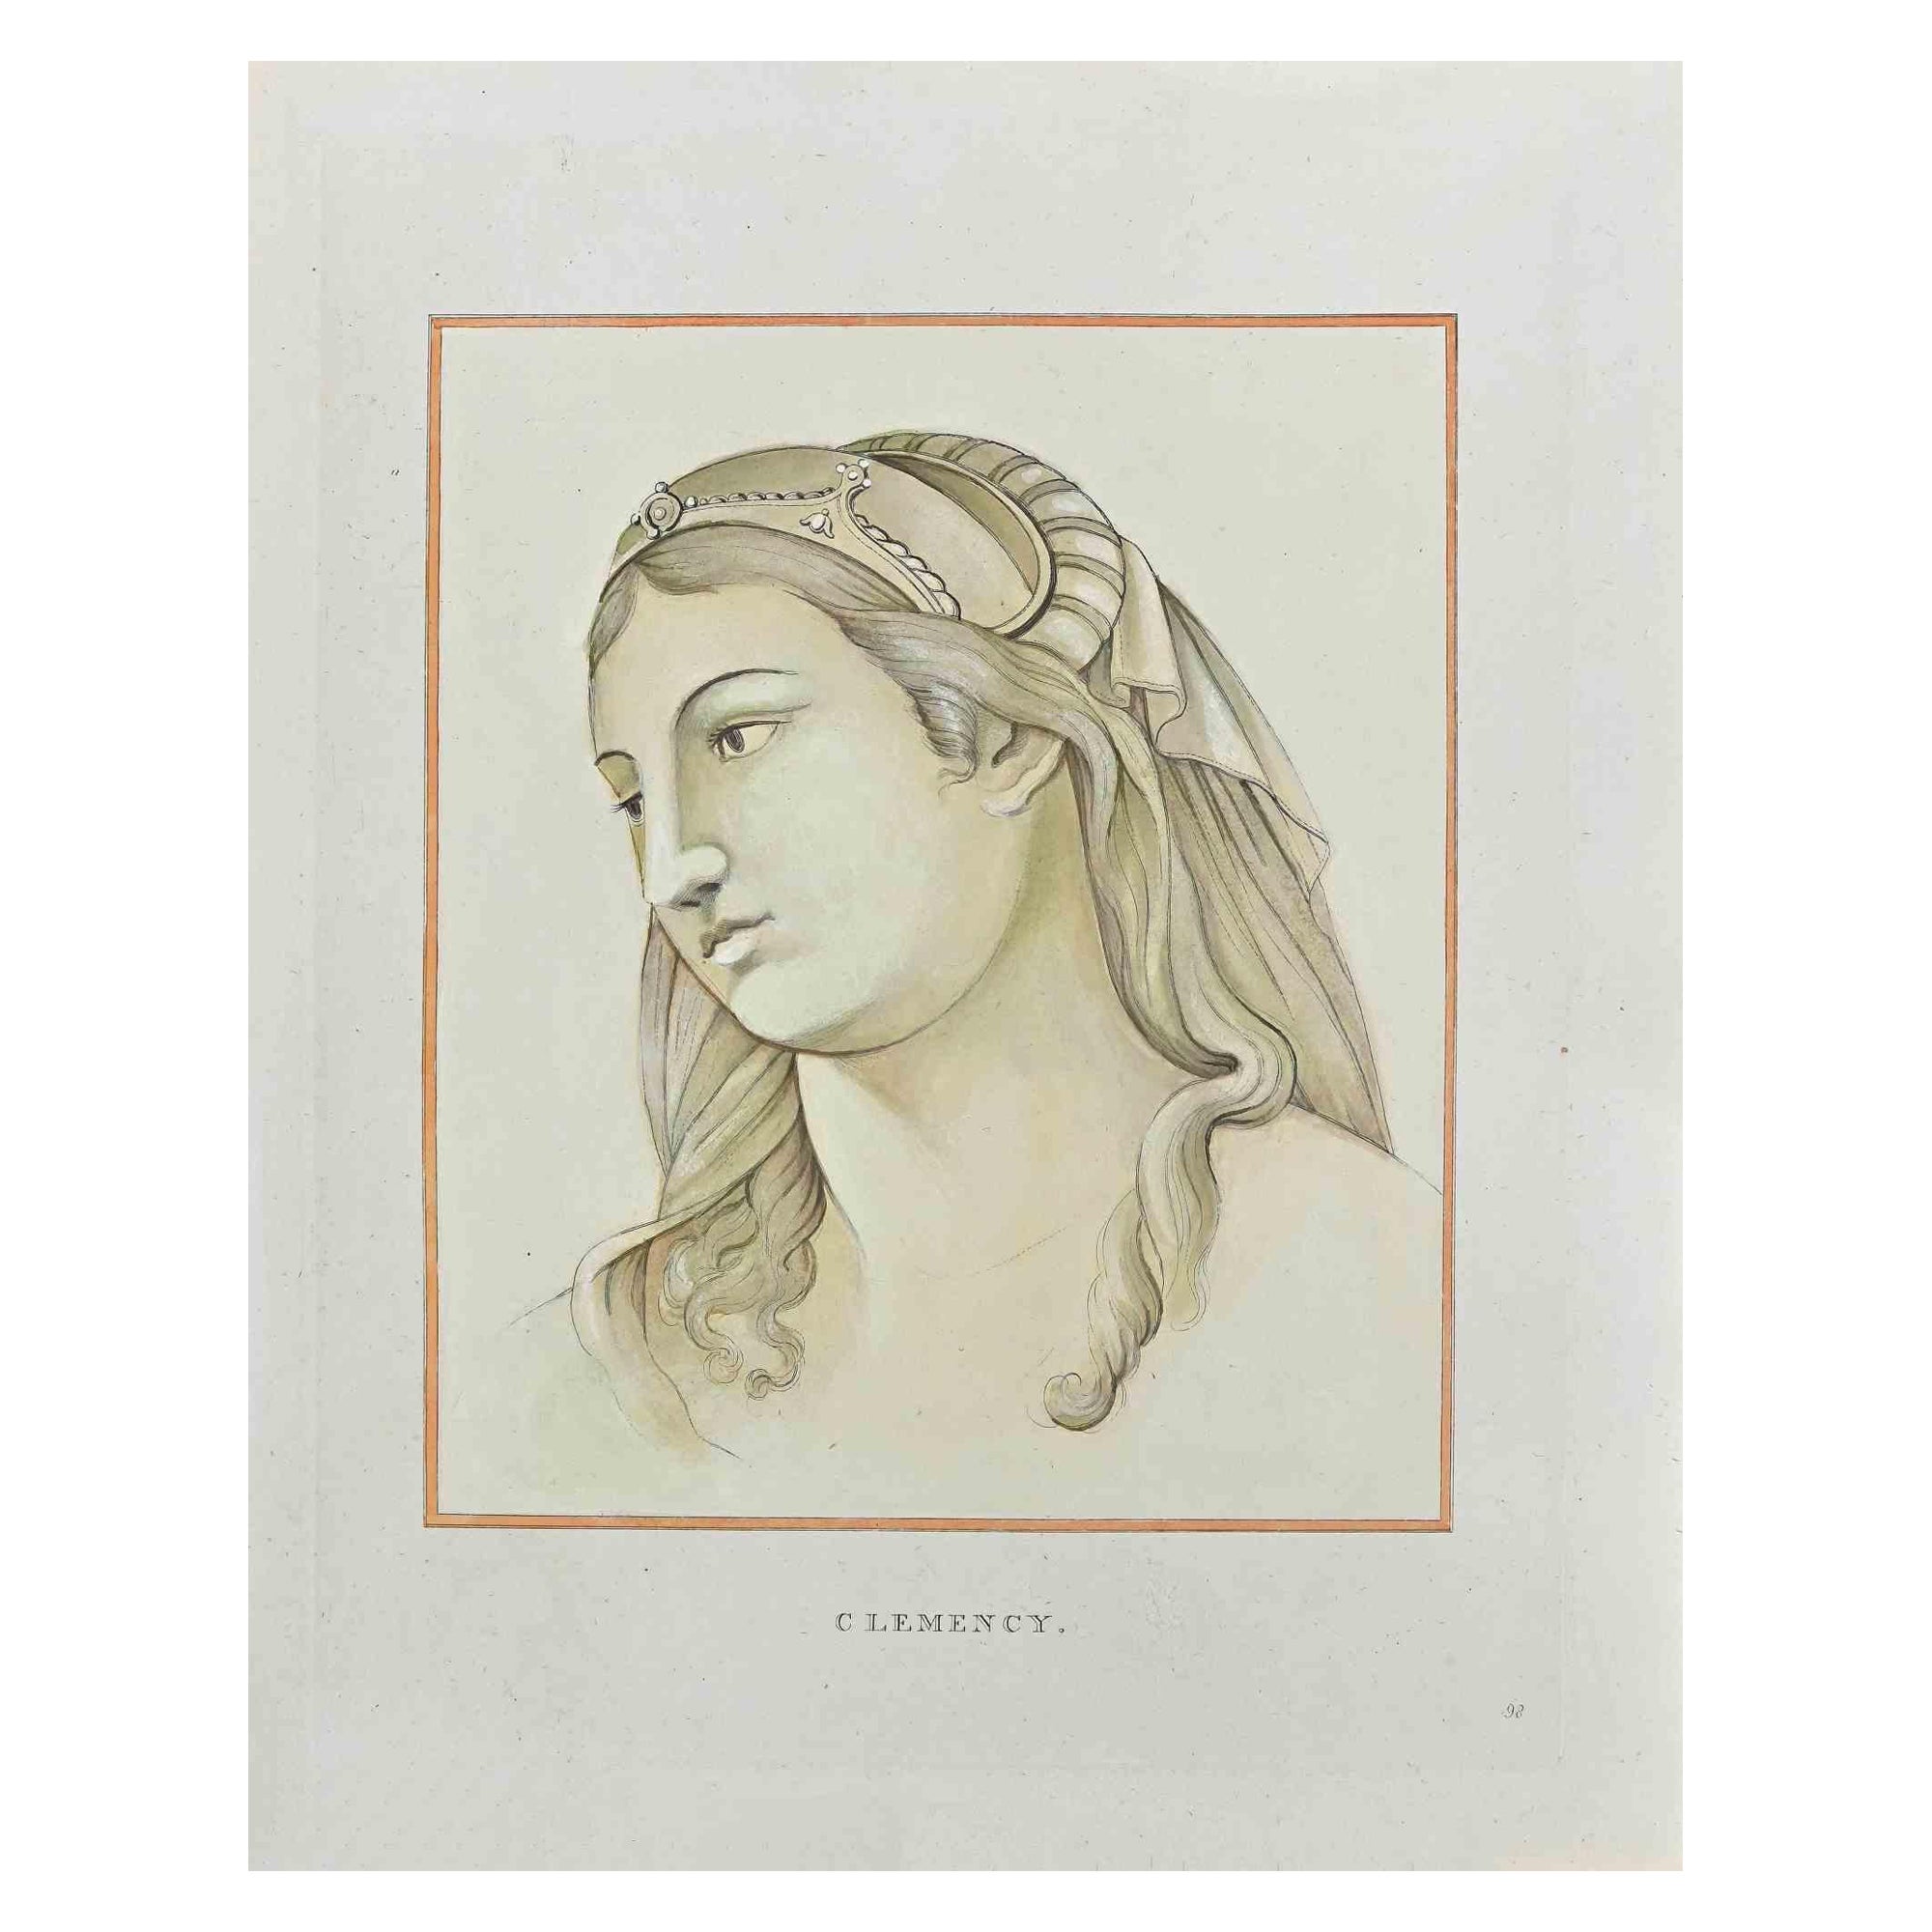 Portrait of the Clemency is an etching realized by Thomas Holloway for Johann Caspar Lavater's "Essays on Physiognomy, Designed to Promote the Knowledge and the Love of Mankind", London, Bensley, 1810. 

Good conditions.

Johann Caspar Lavater was a